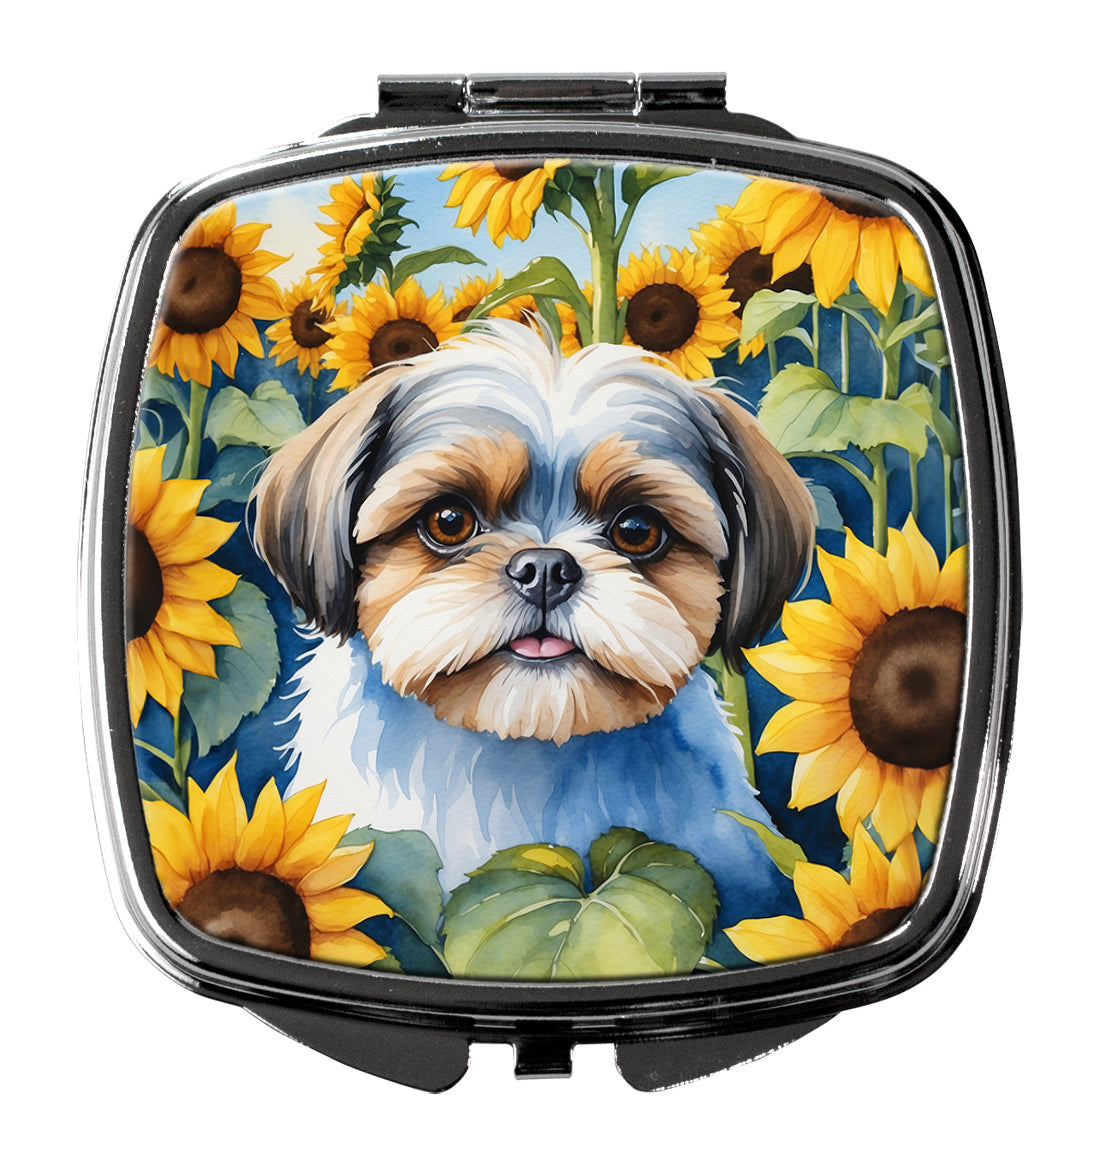 Buy this Shih Tzu in Sunflowers Compact Mirror